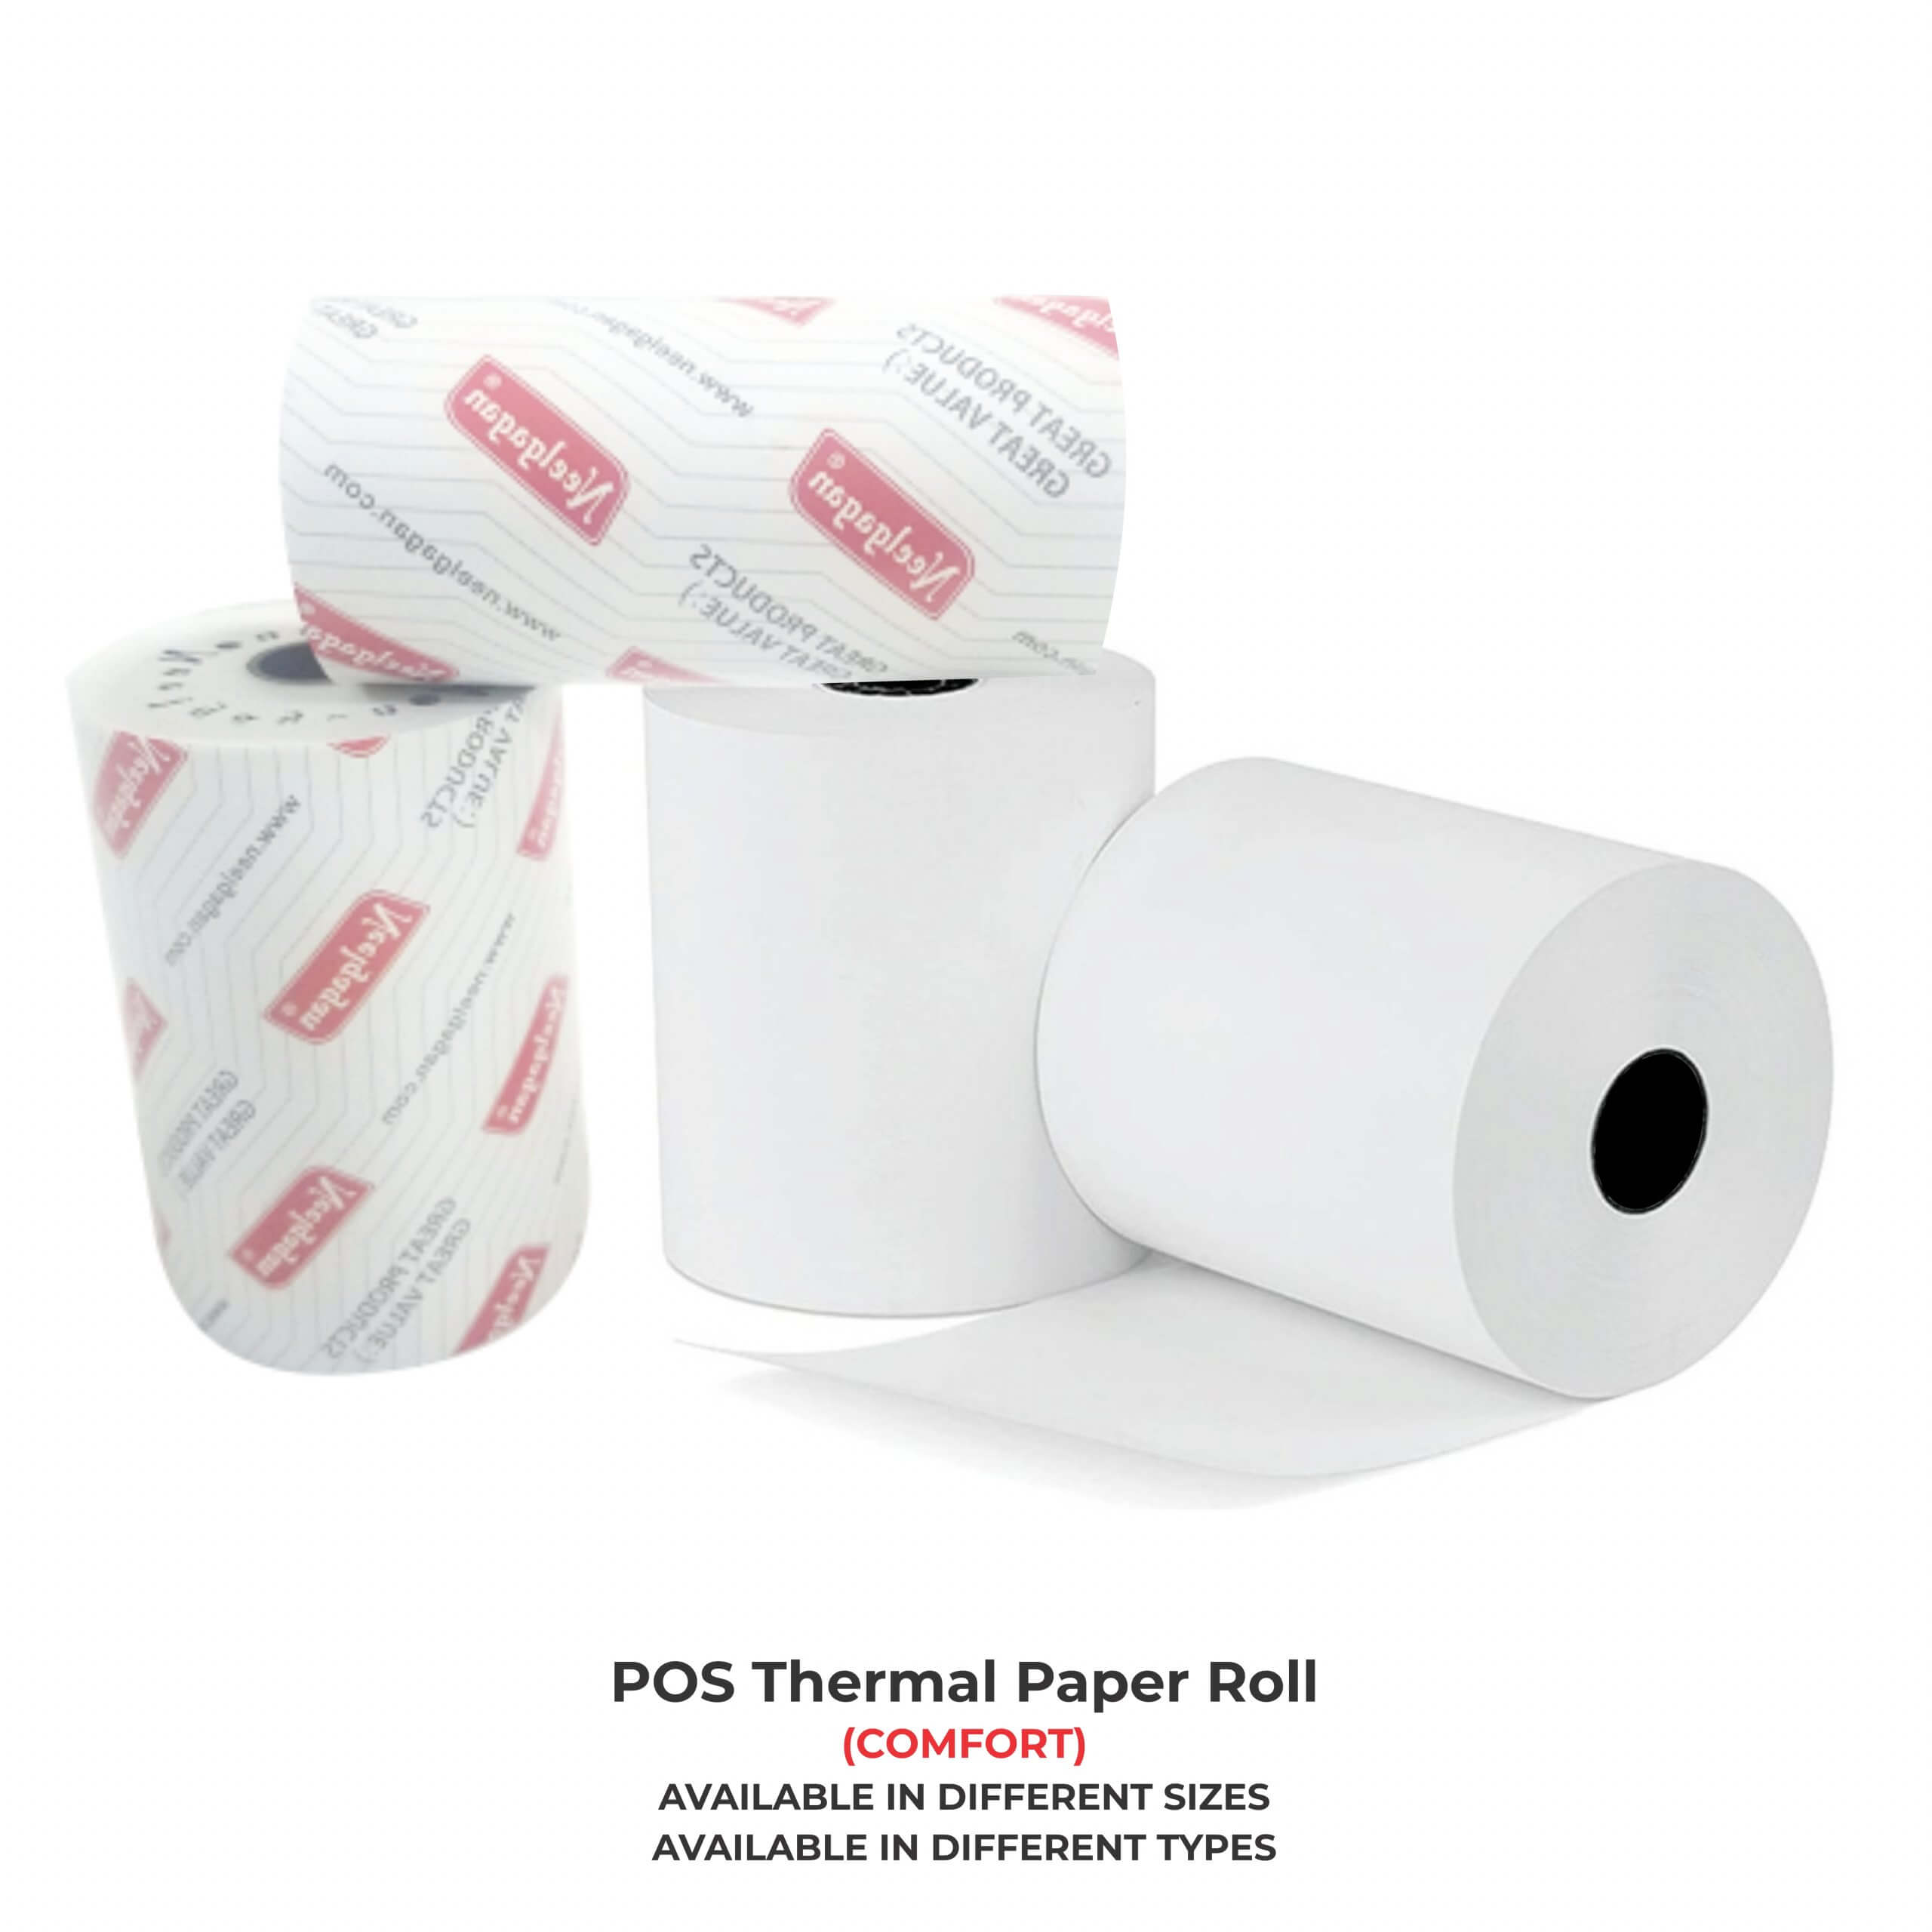 POS Thermal Paper Roll (Comfort)